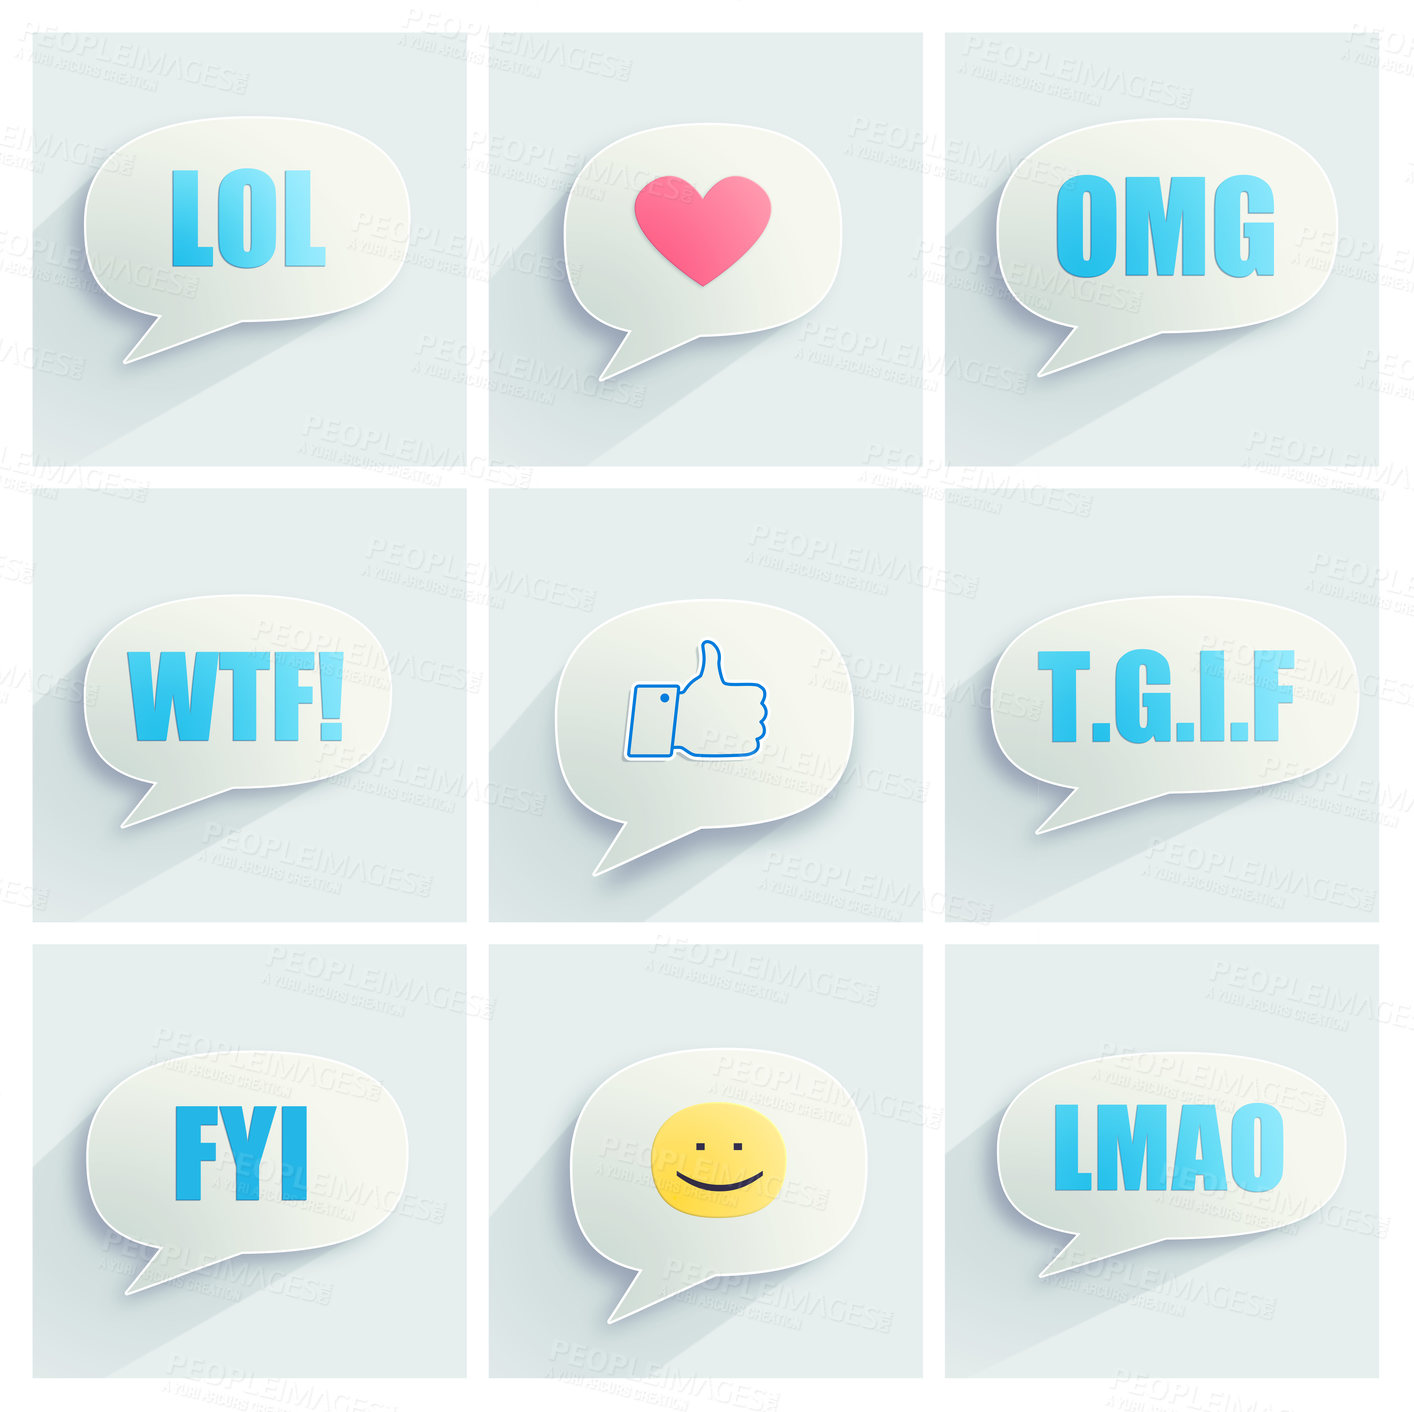 Buy stock photo Vector, speech bubble or app icons for social media, online networking or digital communications collage. Wtf, smile or emojis graphic with lol, omg or like sign for messages or texting on technology